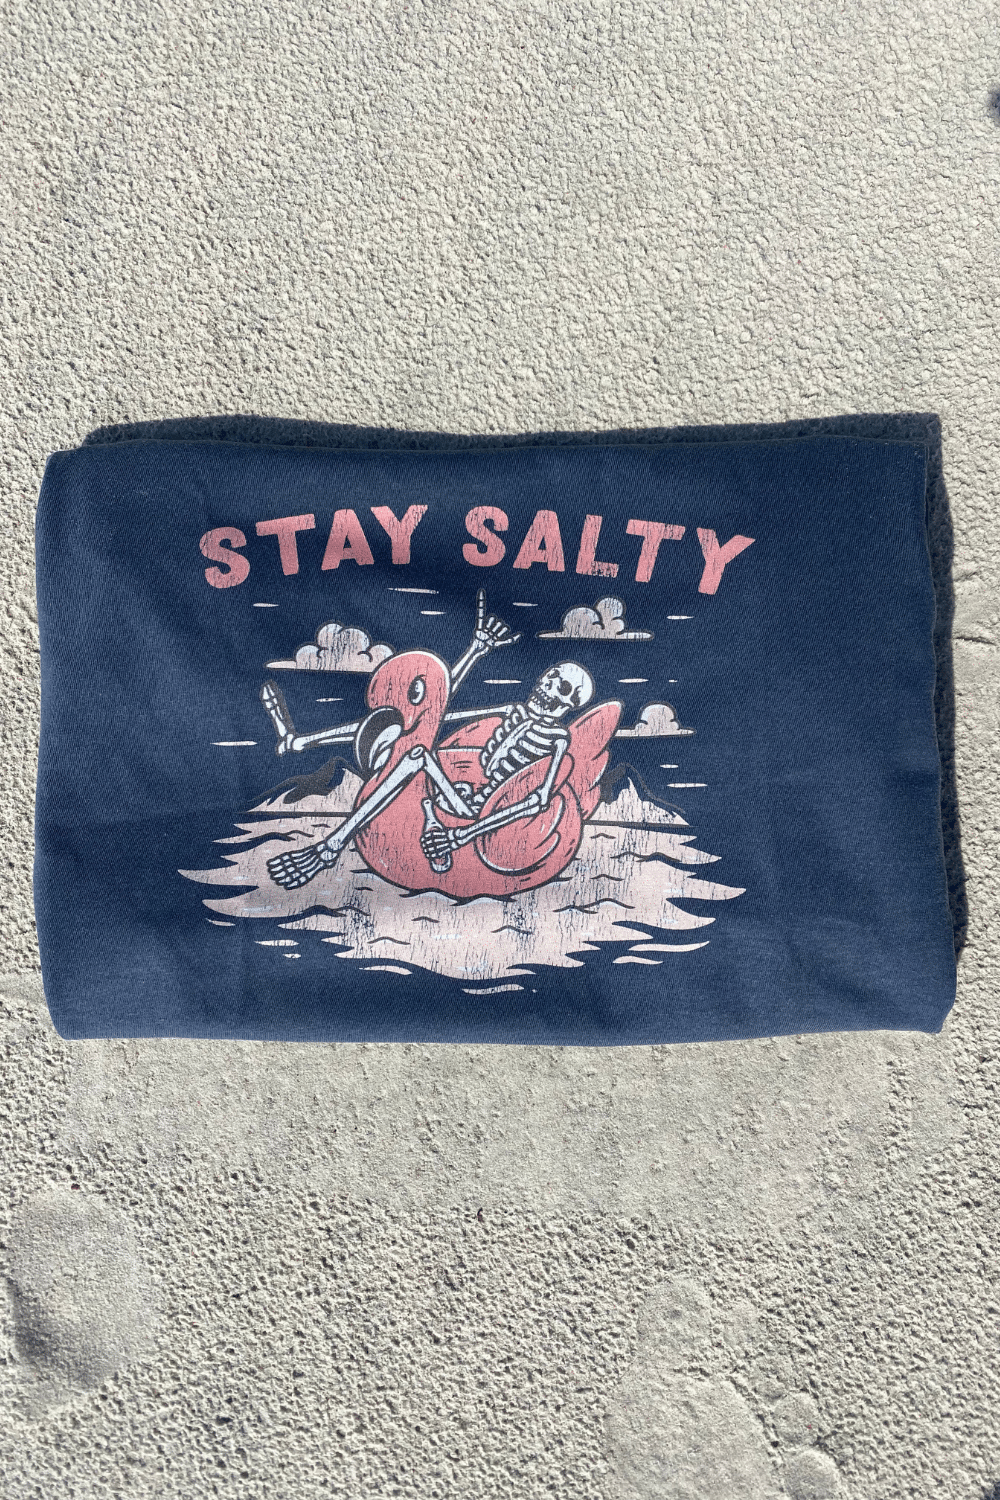 stay salty t shirt